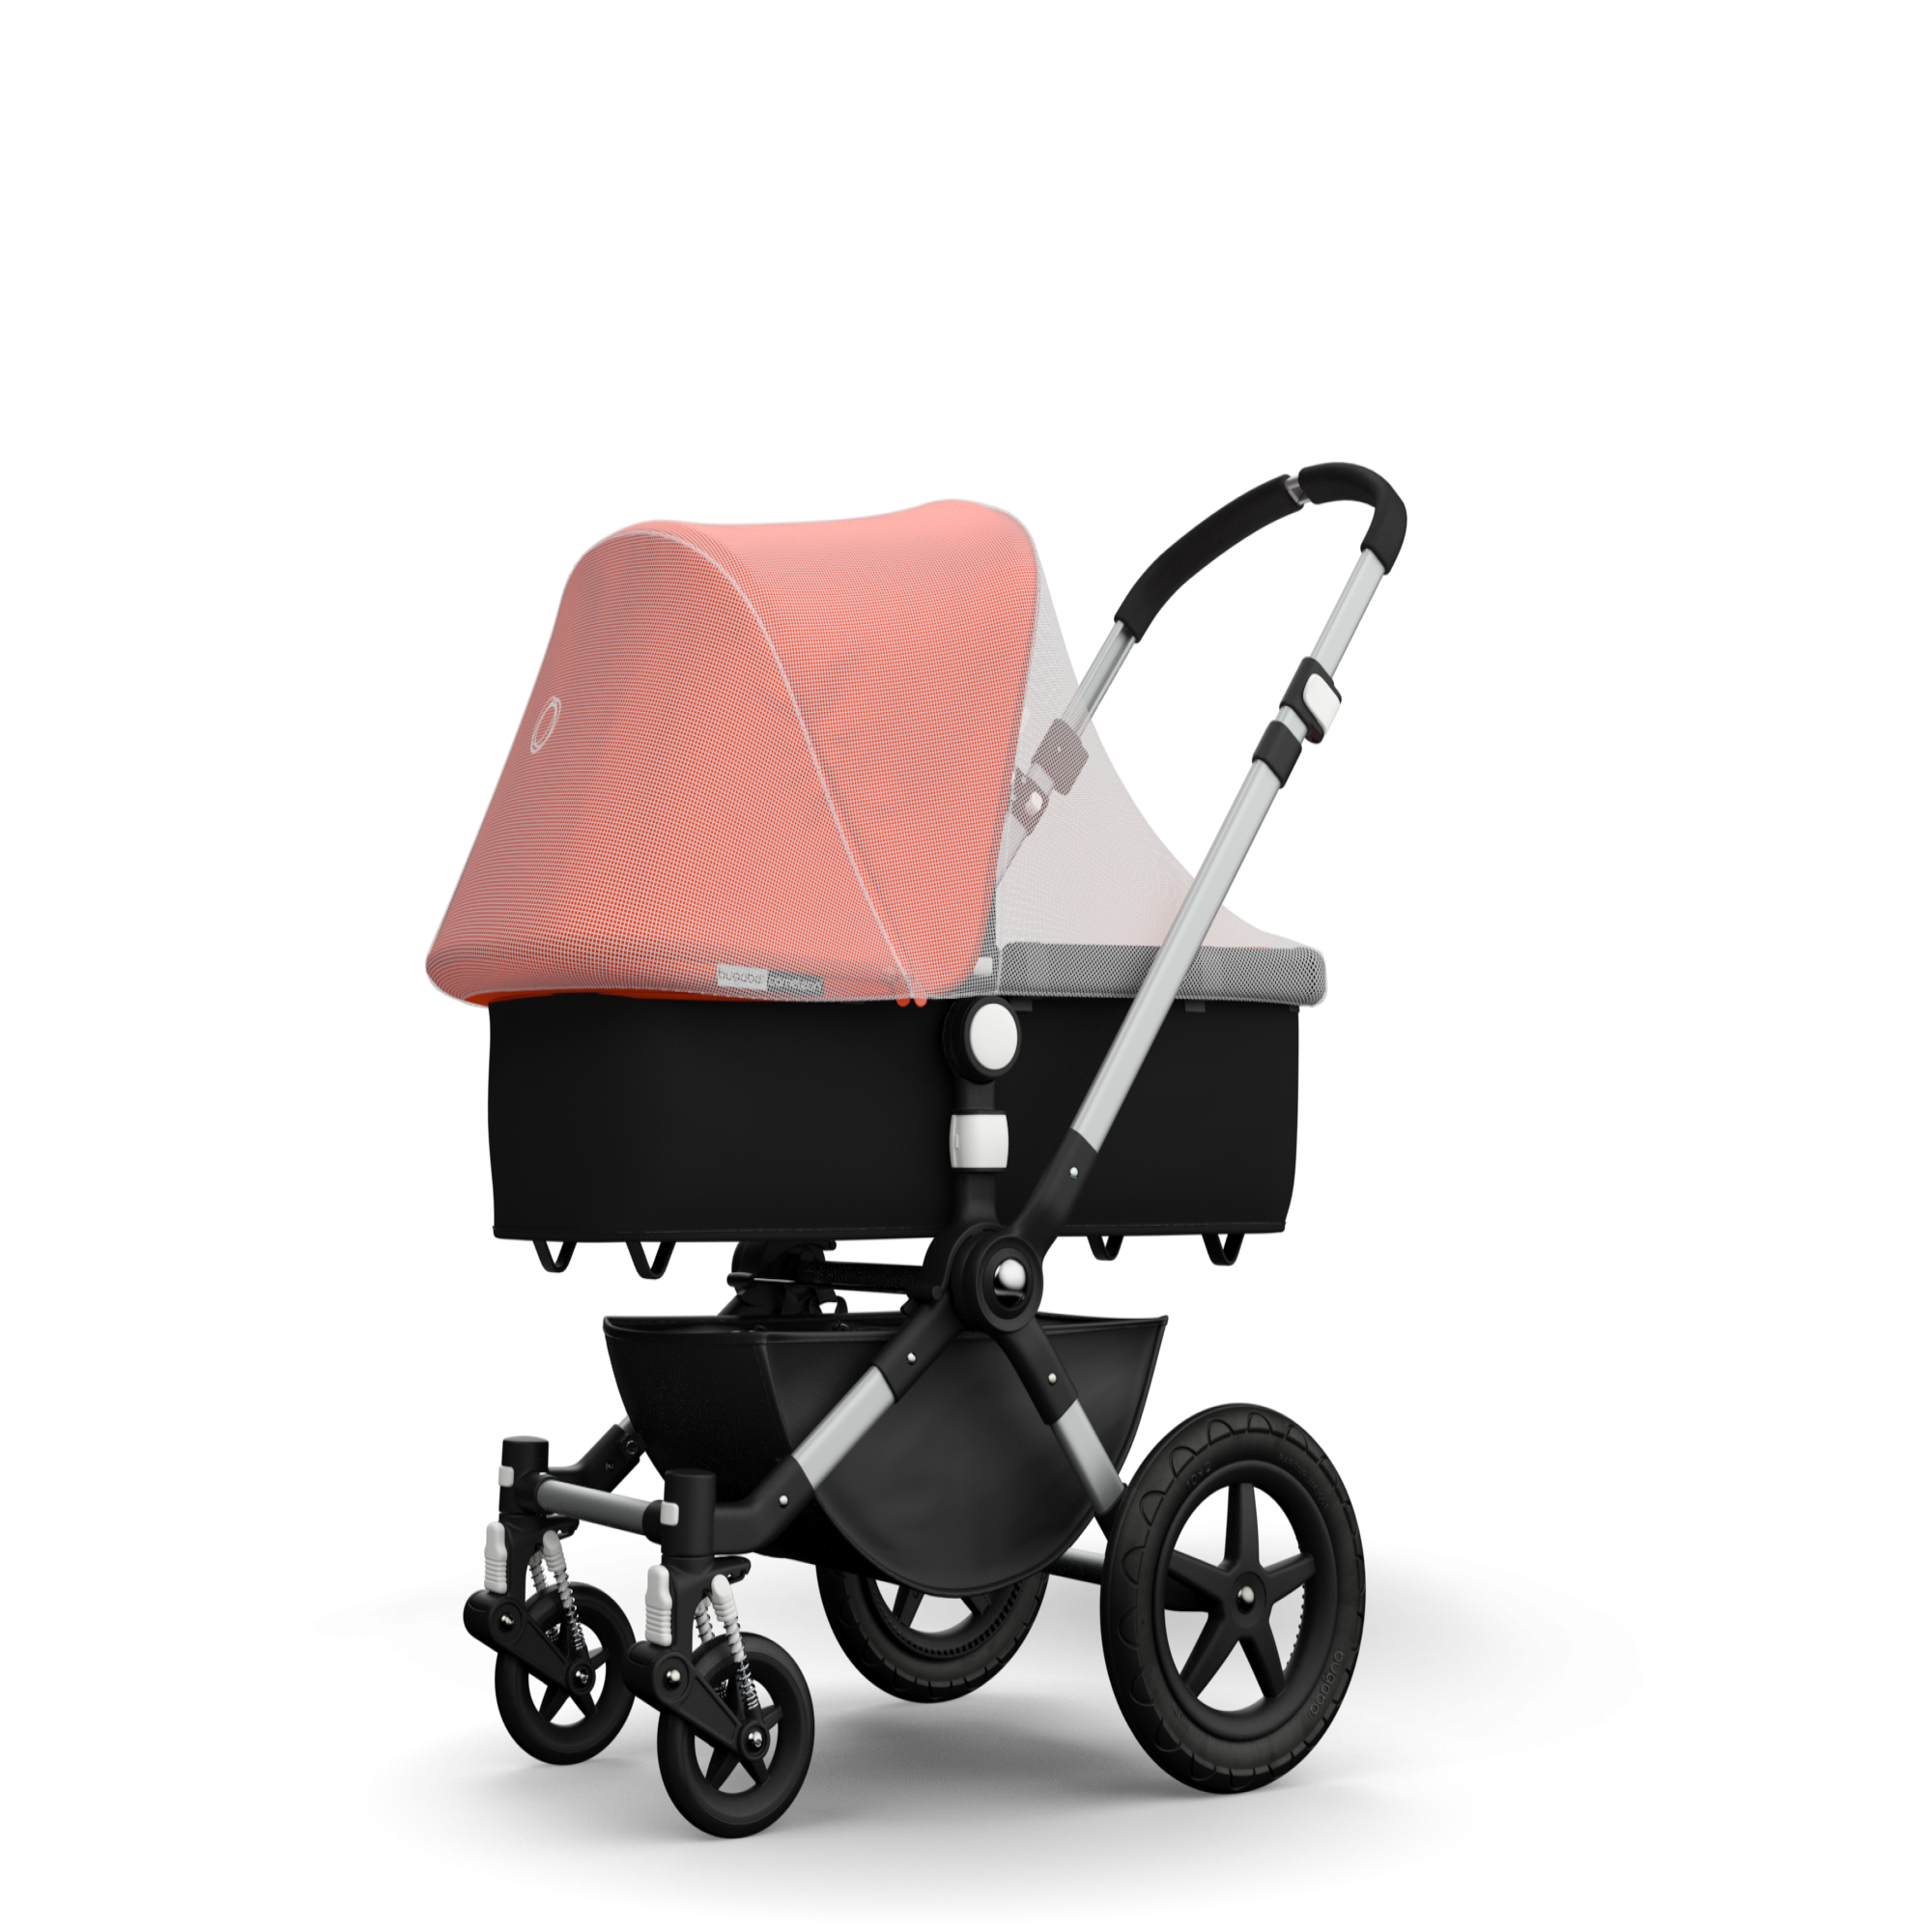 bugaboo insect net